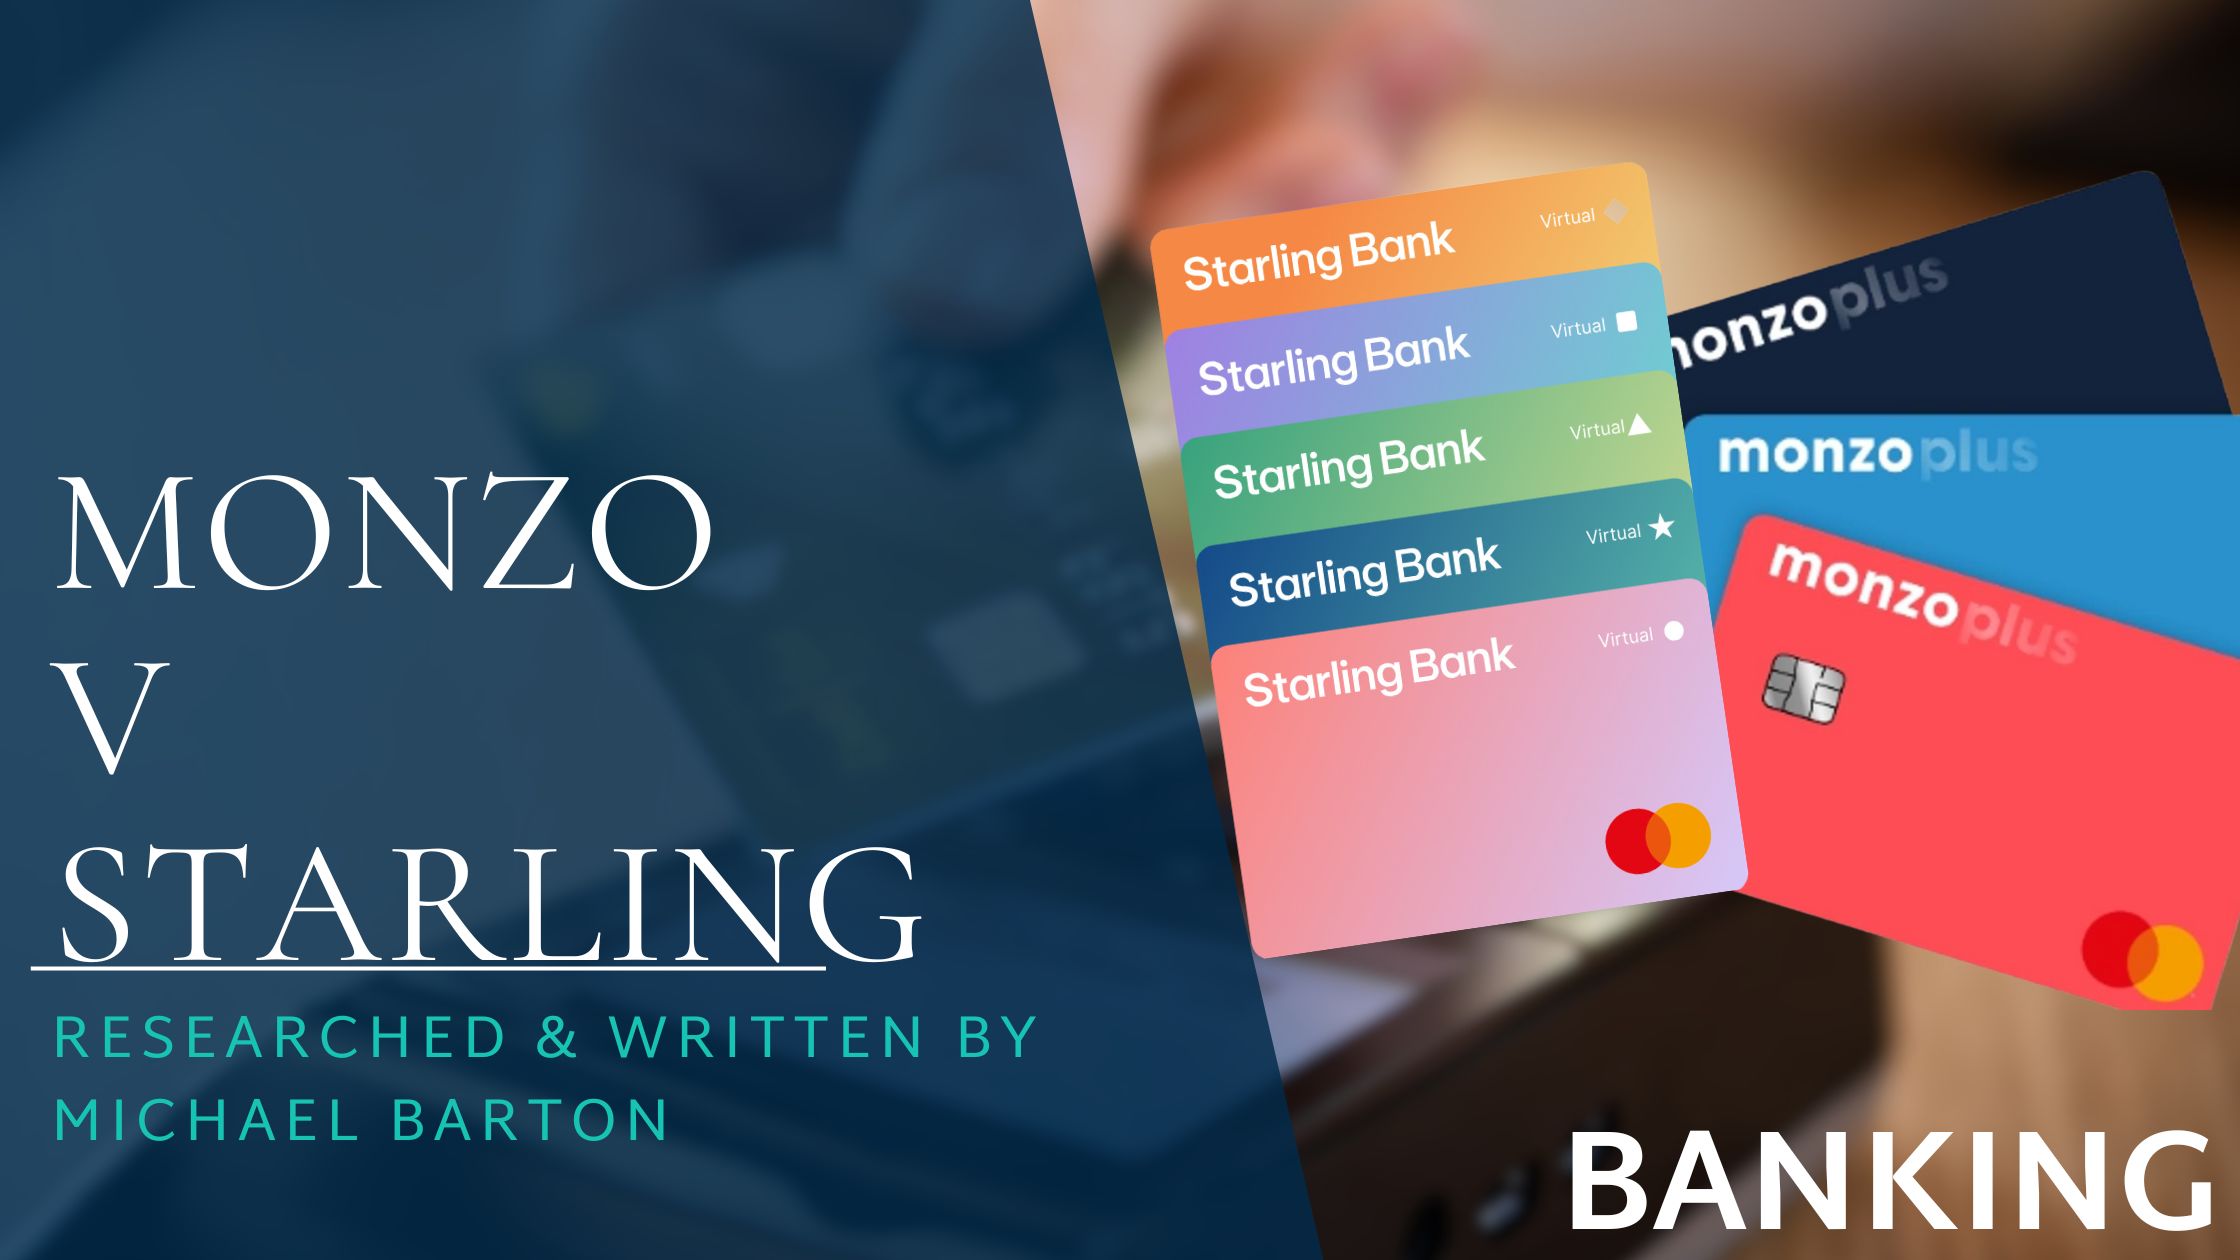 Monzo V Starling feature image